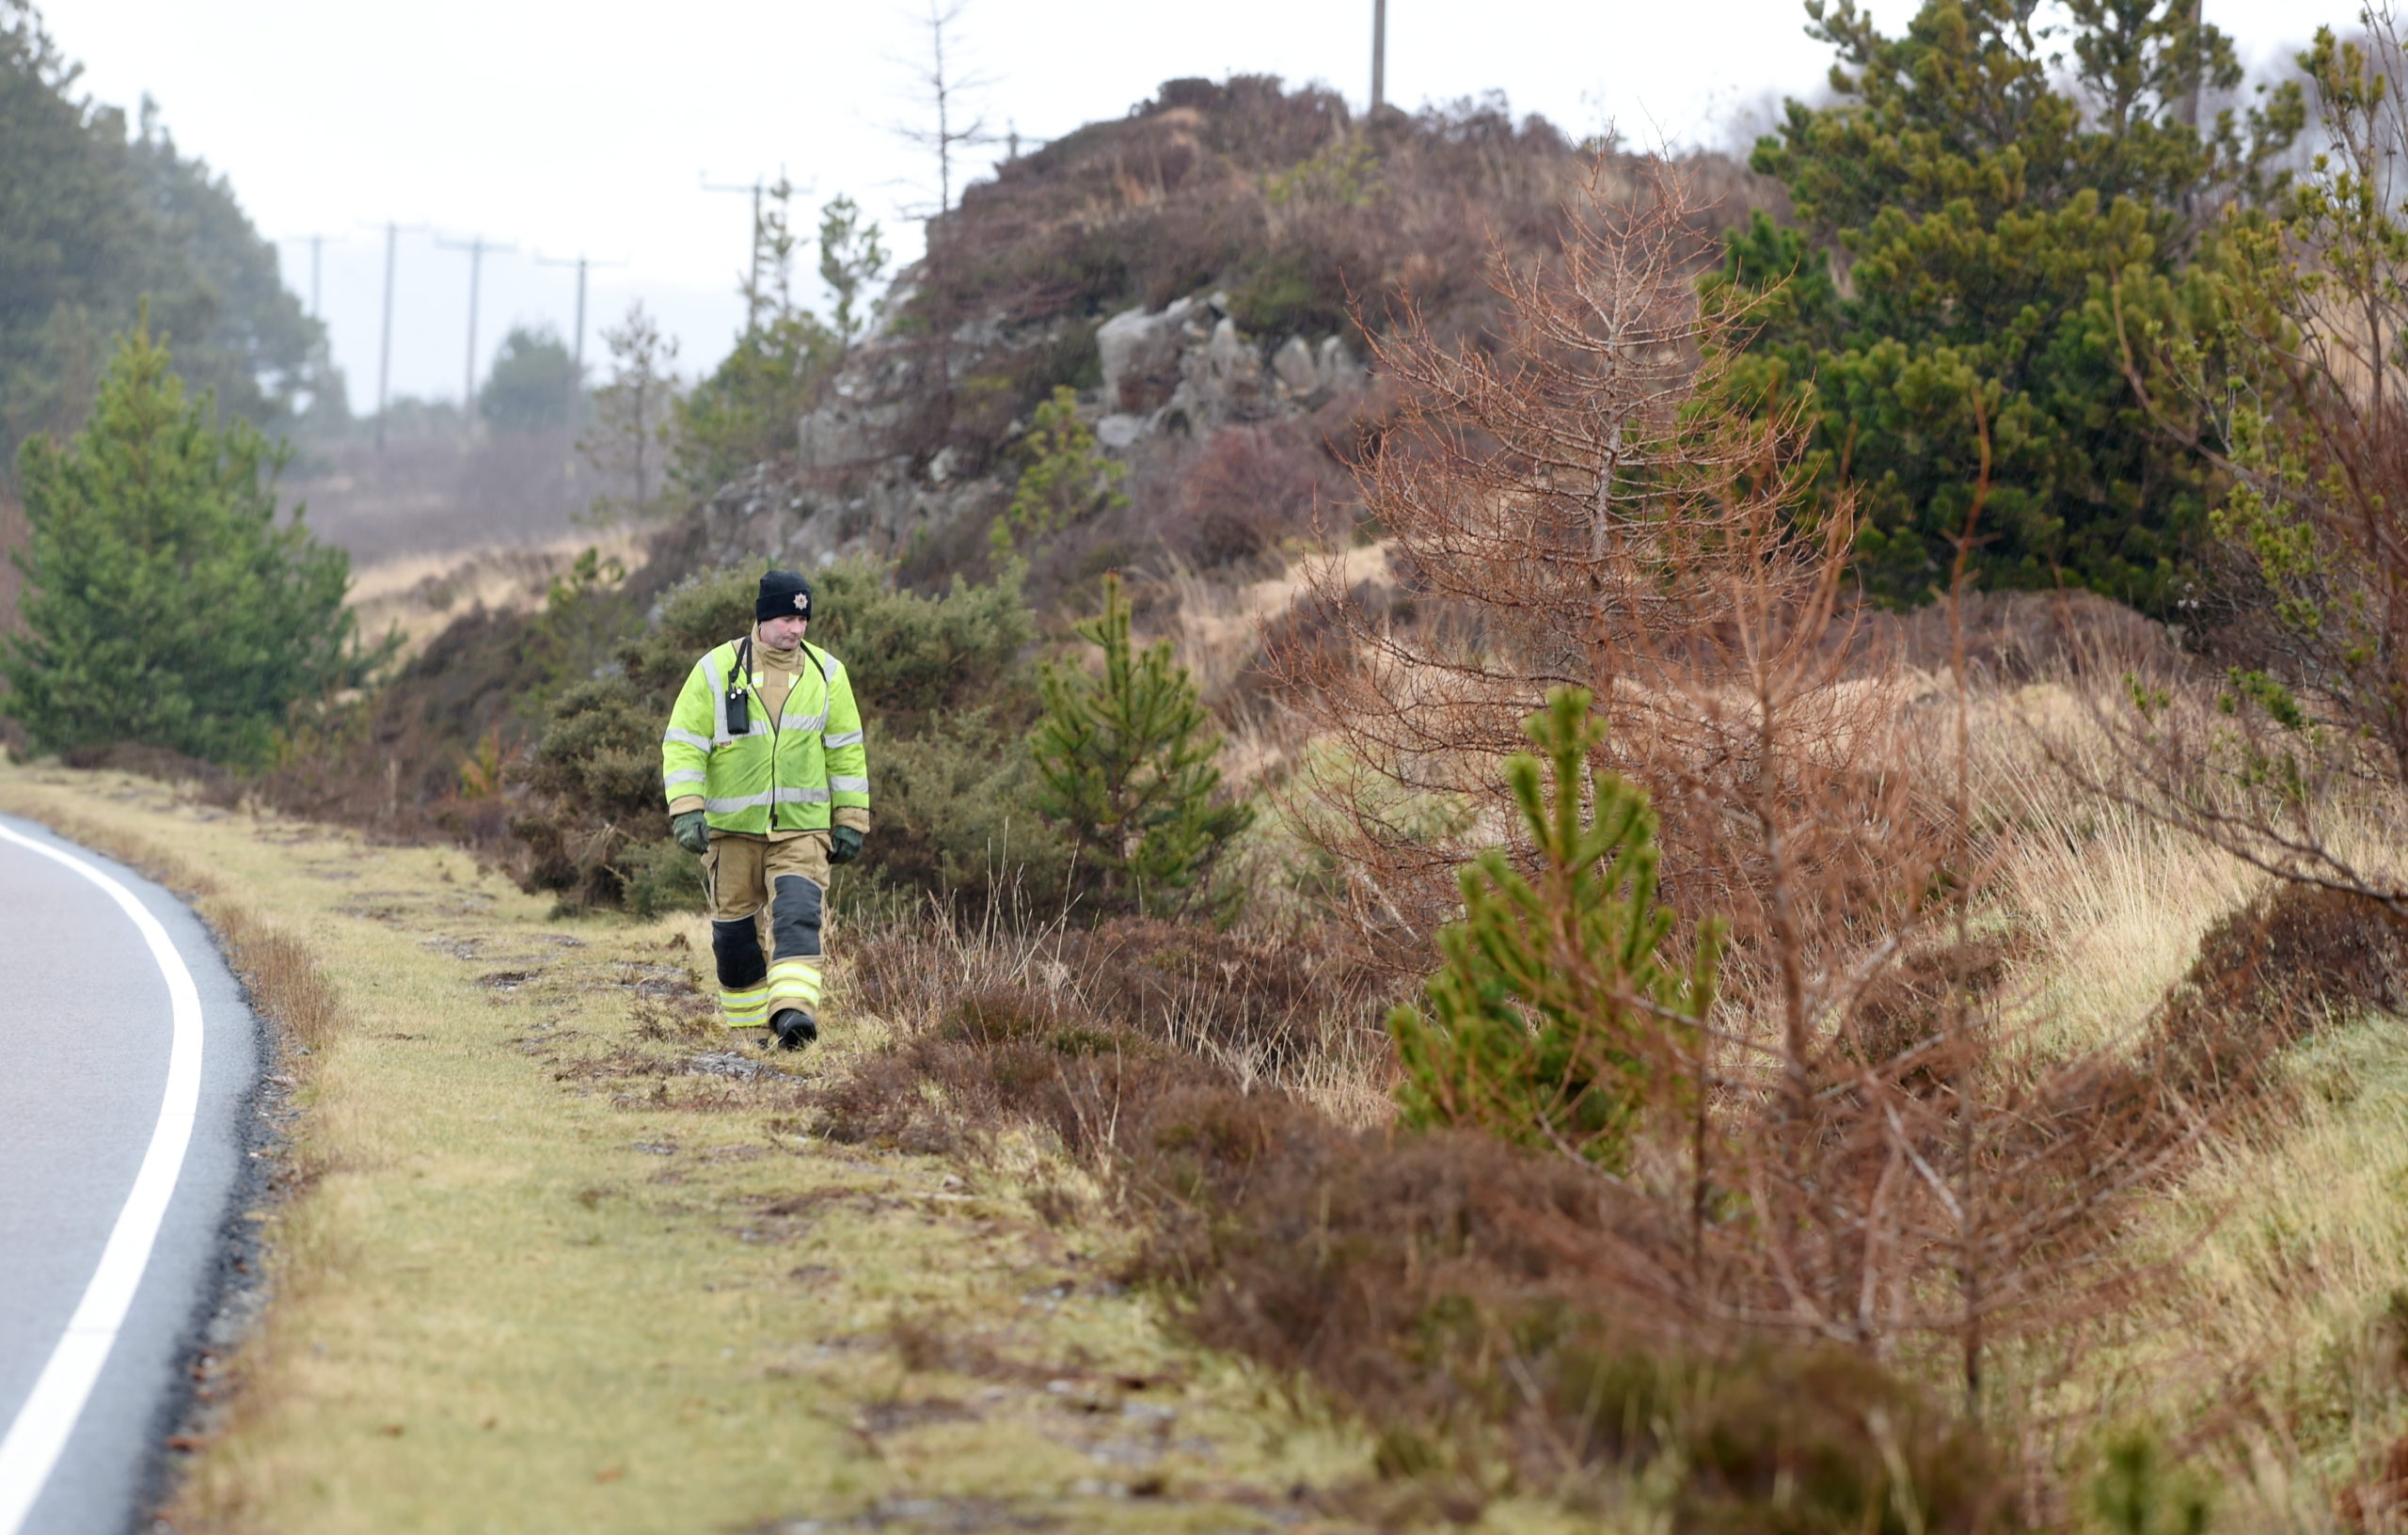 Members of the fire service searching the route between Kyleakin and Broadford on Tuesday.